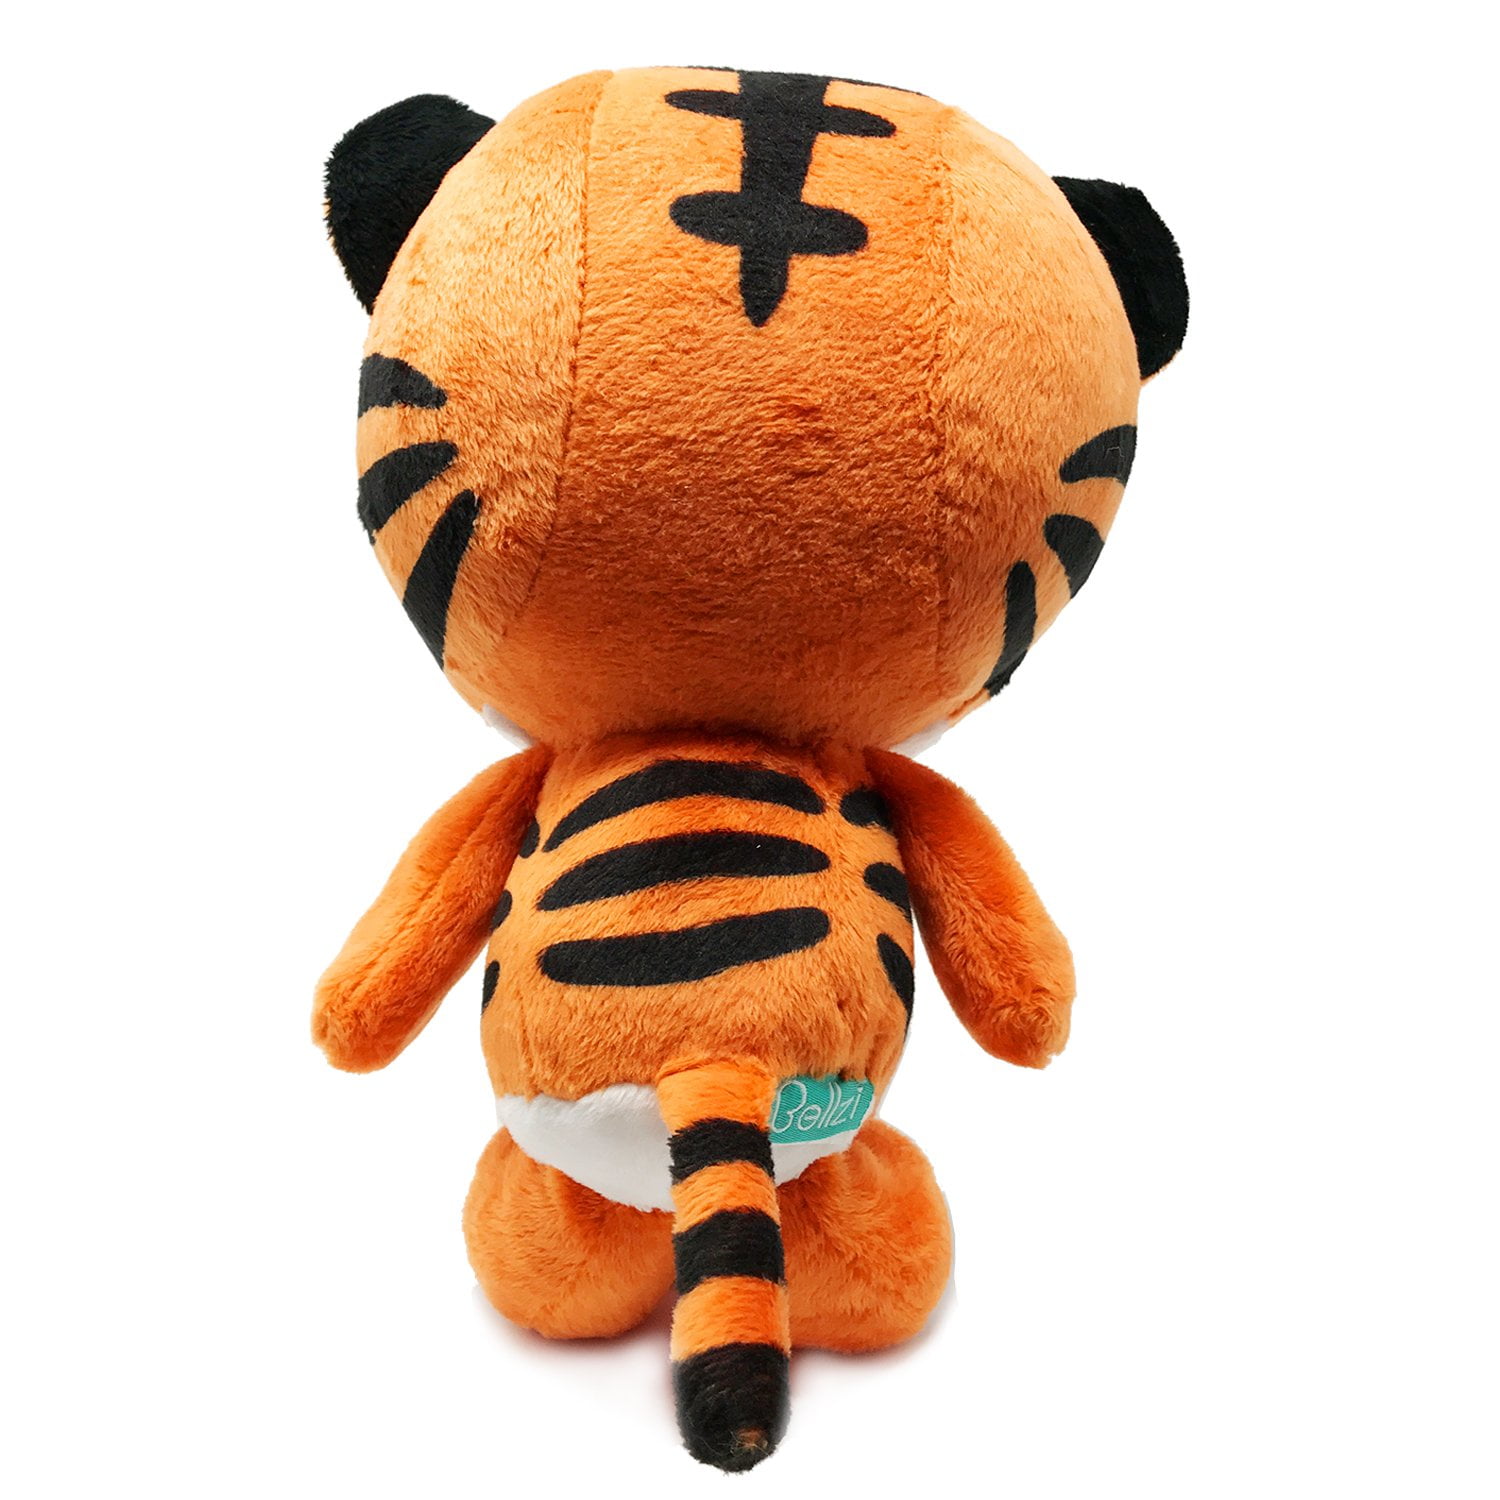 Plush Tiger Pillow Cushion Toy Animals Stuffed Plush Toys Decorative Stuffed Toy Home Decorations Kids and Friends Gifts charmsamx 3D Realistic Soft Stuffed Animals Plush Toy 